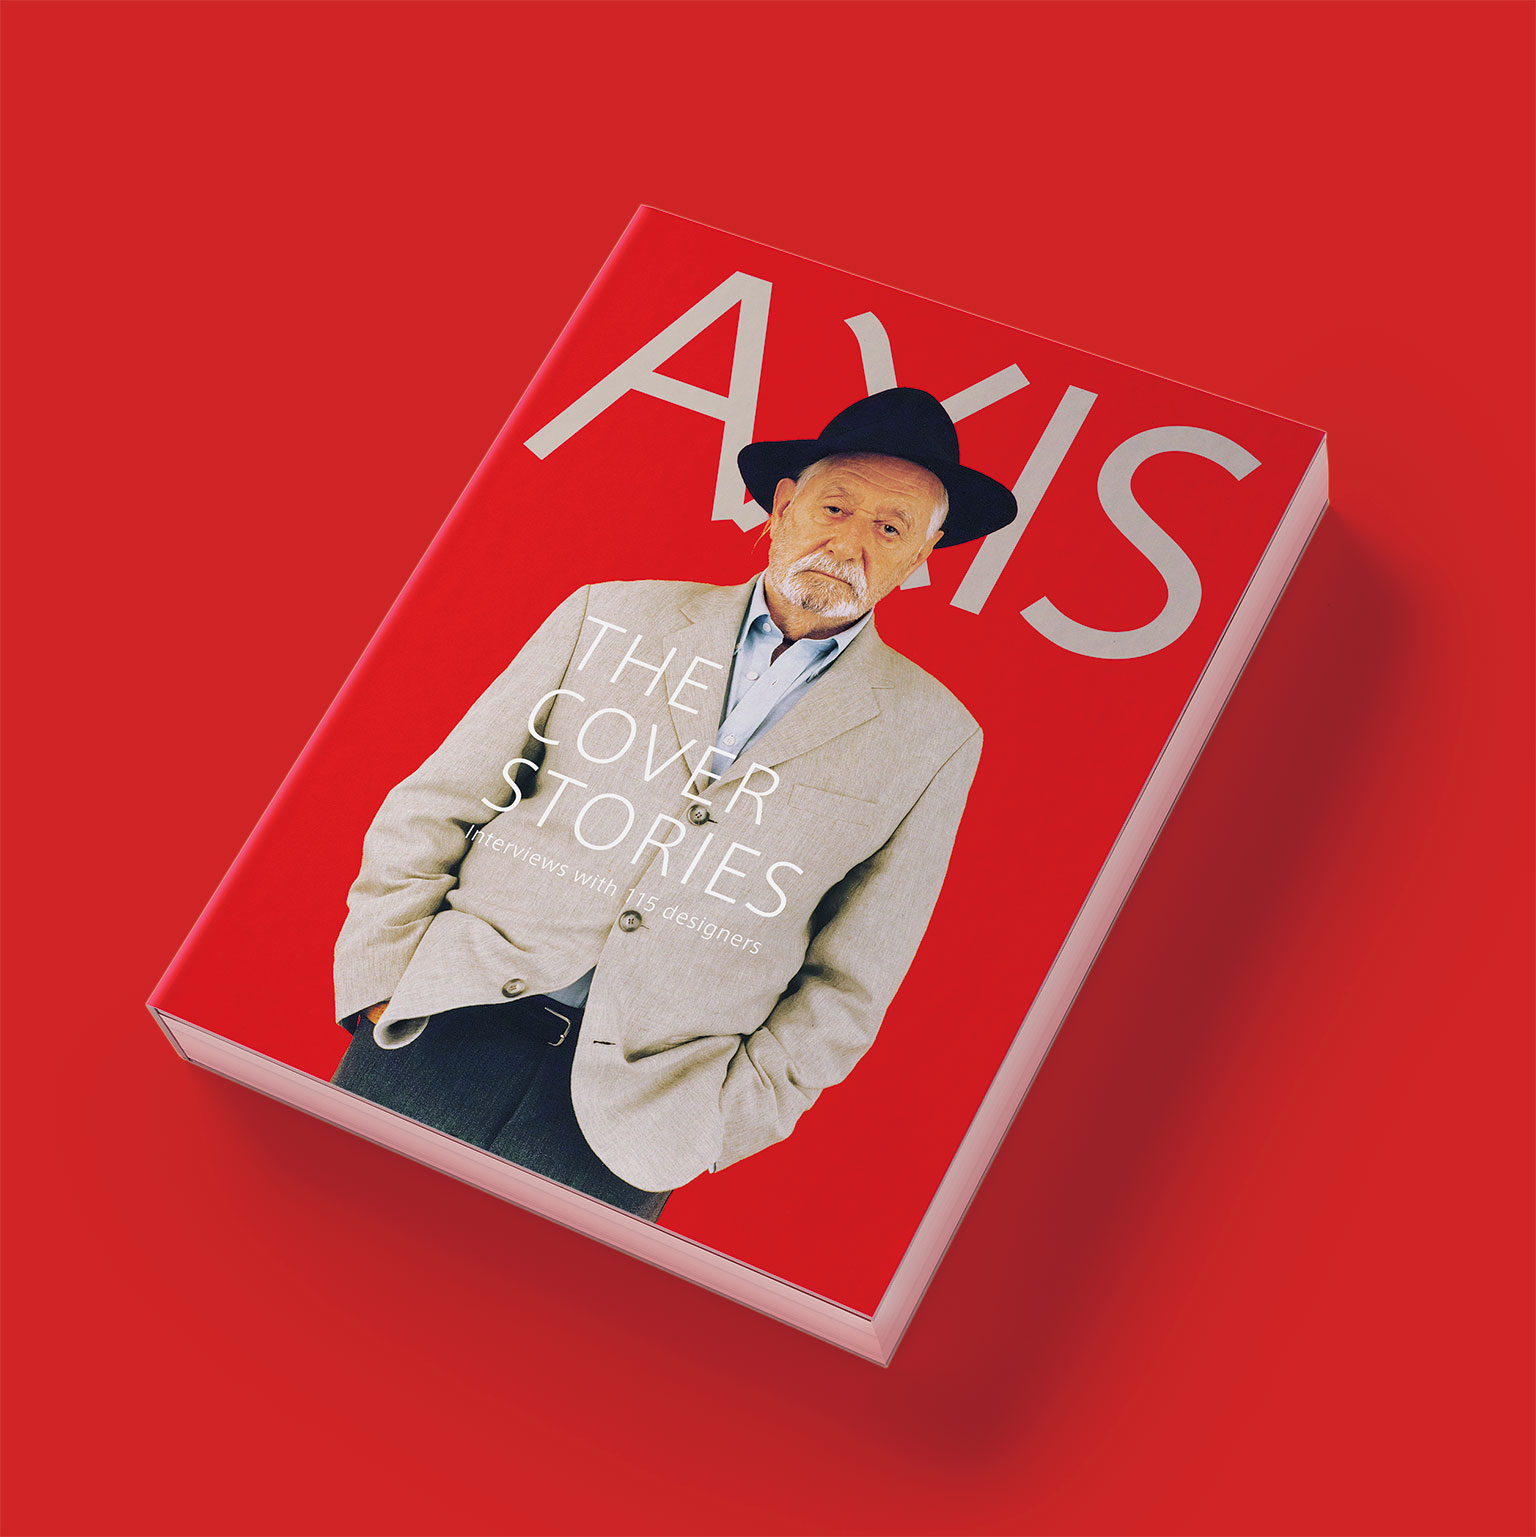 AXIS THE COVER STORIES